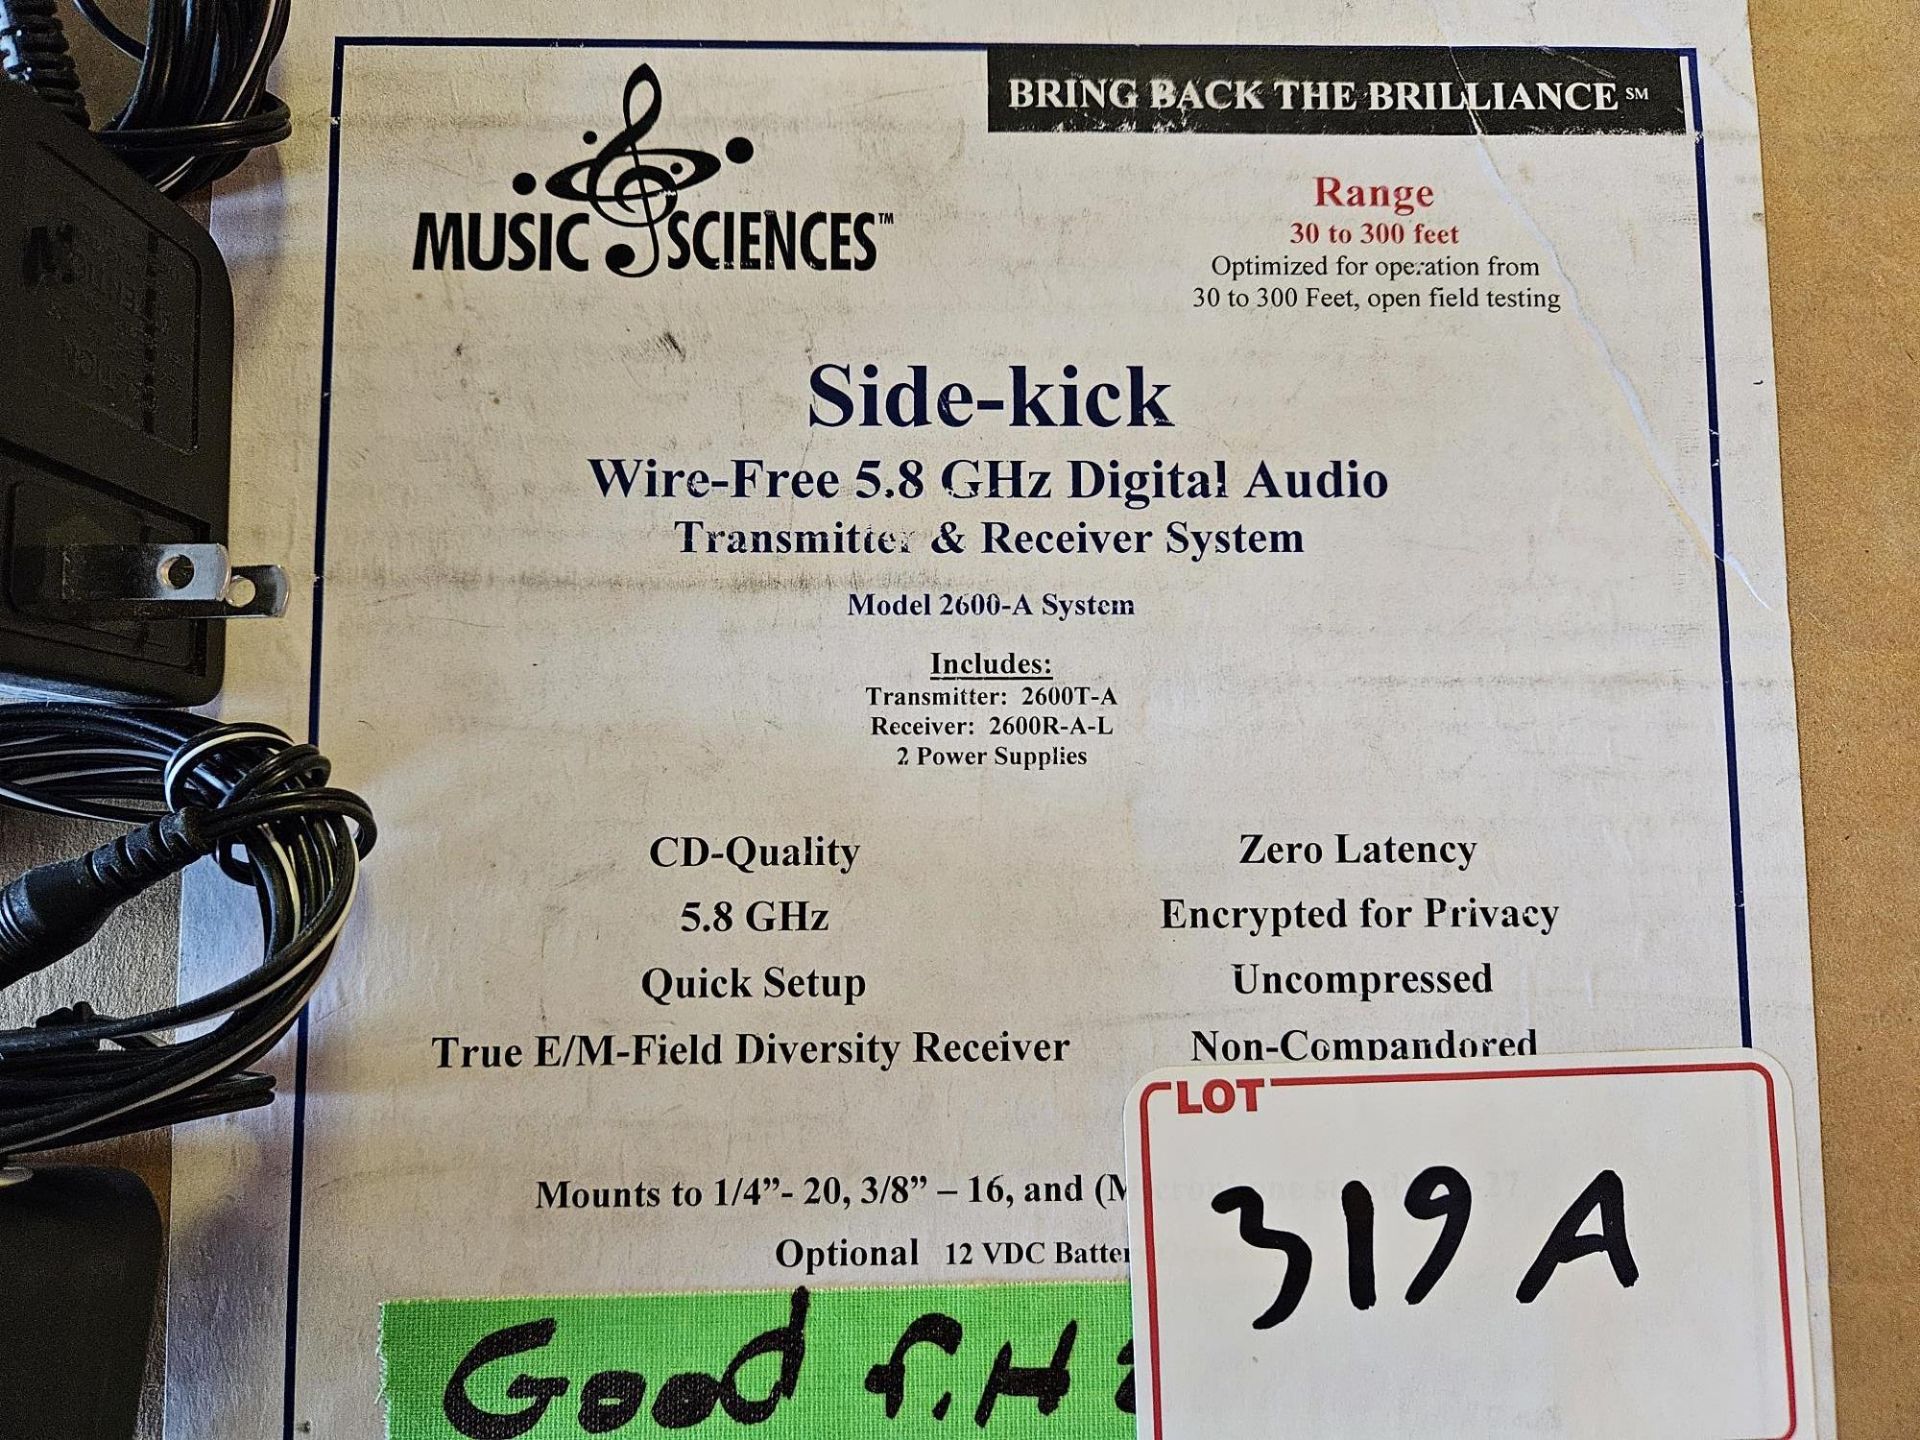 MUSIC SCIENCE SIDE KICK WIRE FREE 5.8 GHZ DIGITAL AUDIO TRANSMITTER & RECEIVER SYSTEM MODEL 2600 A - Image 2 of 2